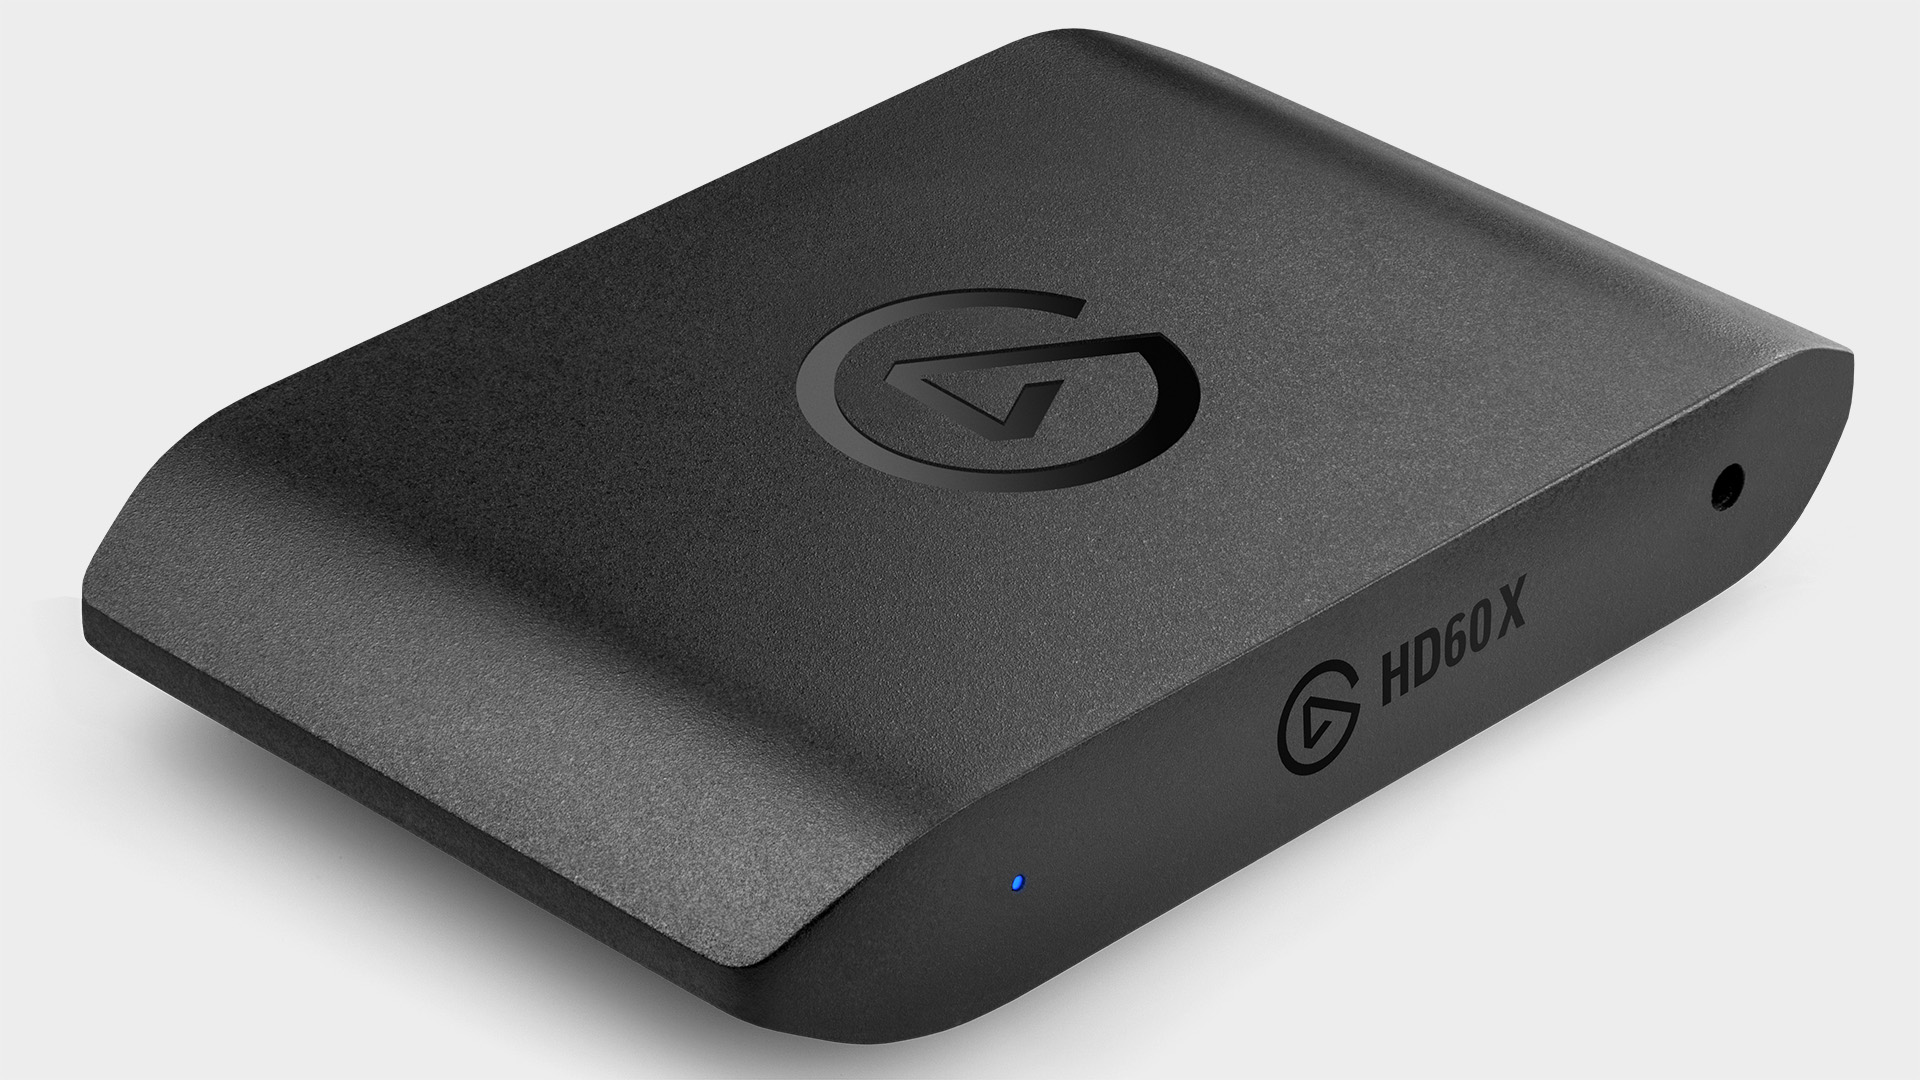 Elgato HD60 X capture card from the front on